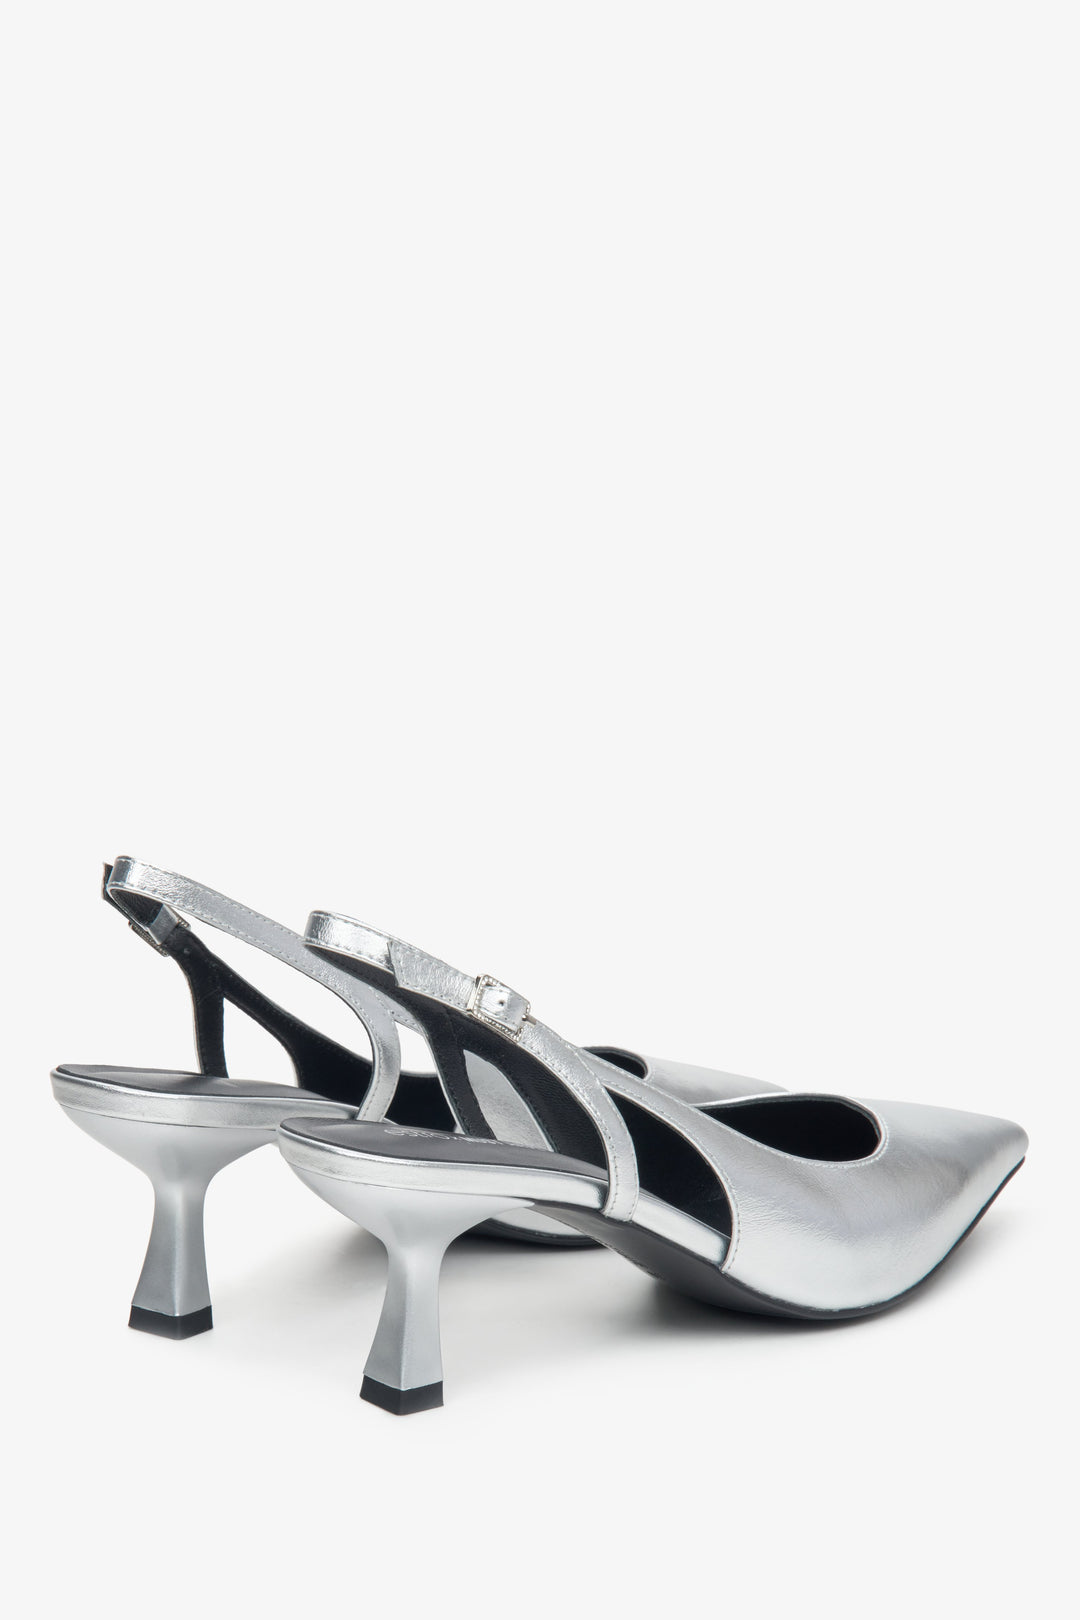 Estro X MustHave women's slingback pumps in silver natural leather - close-up on the heel and side line of the shoes.